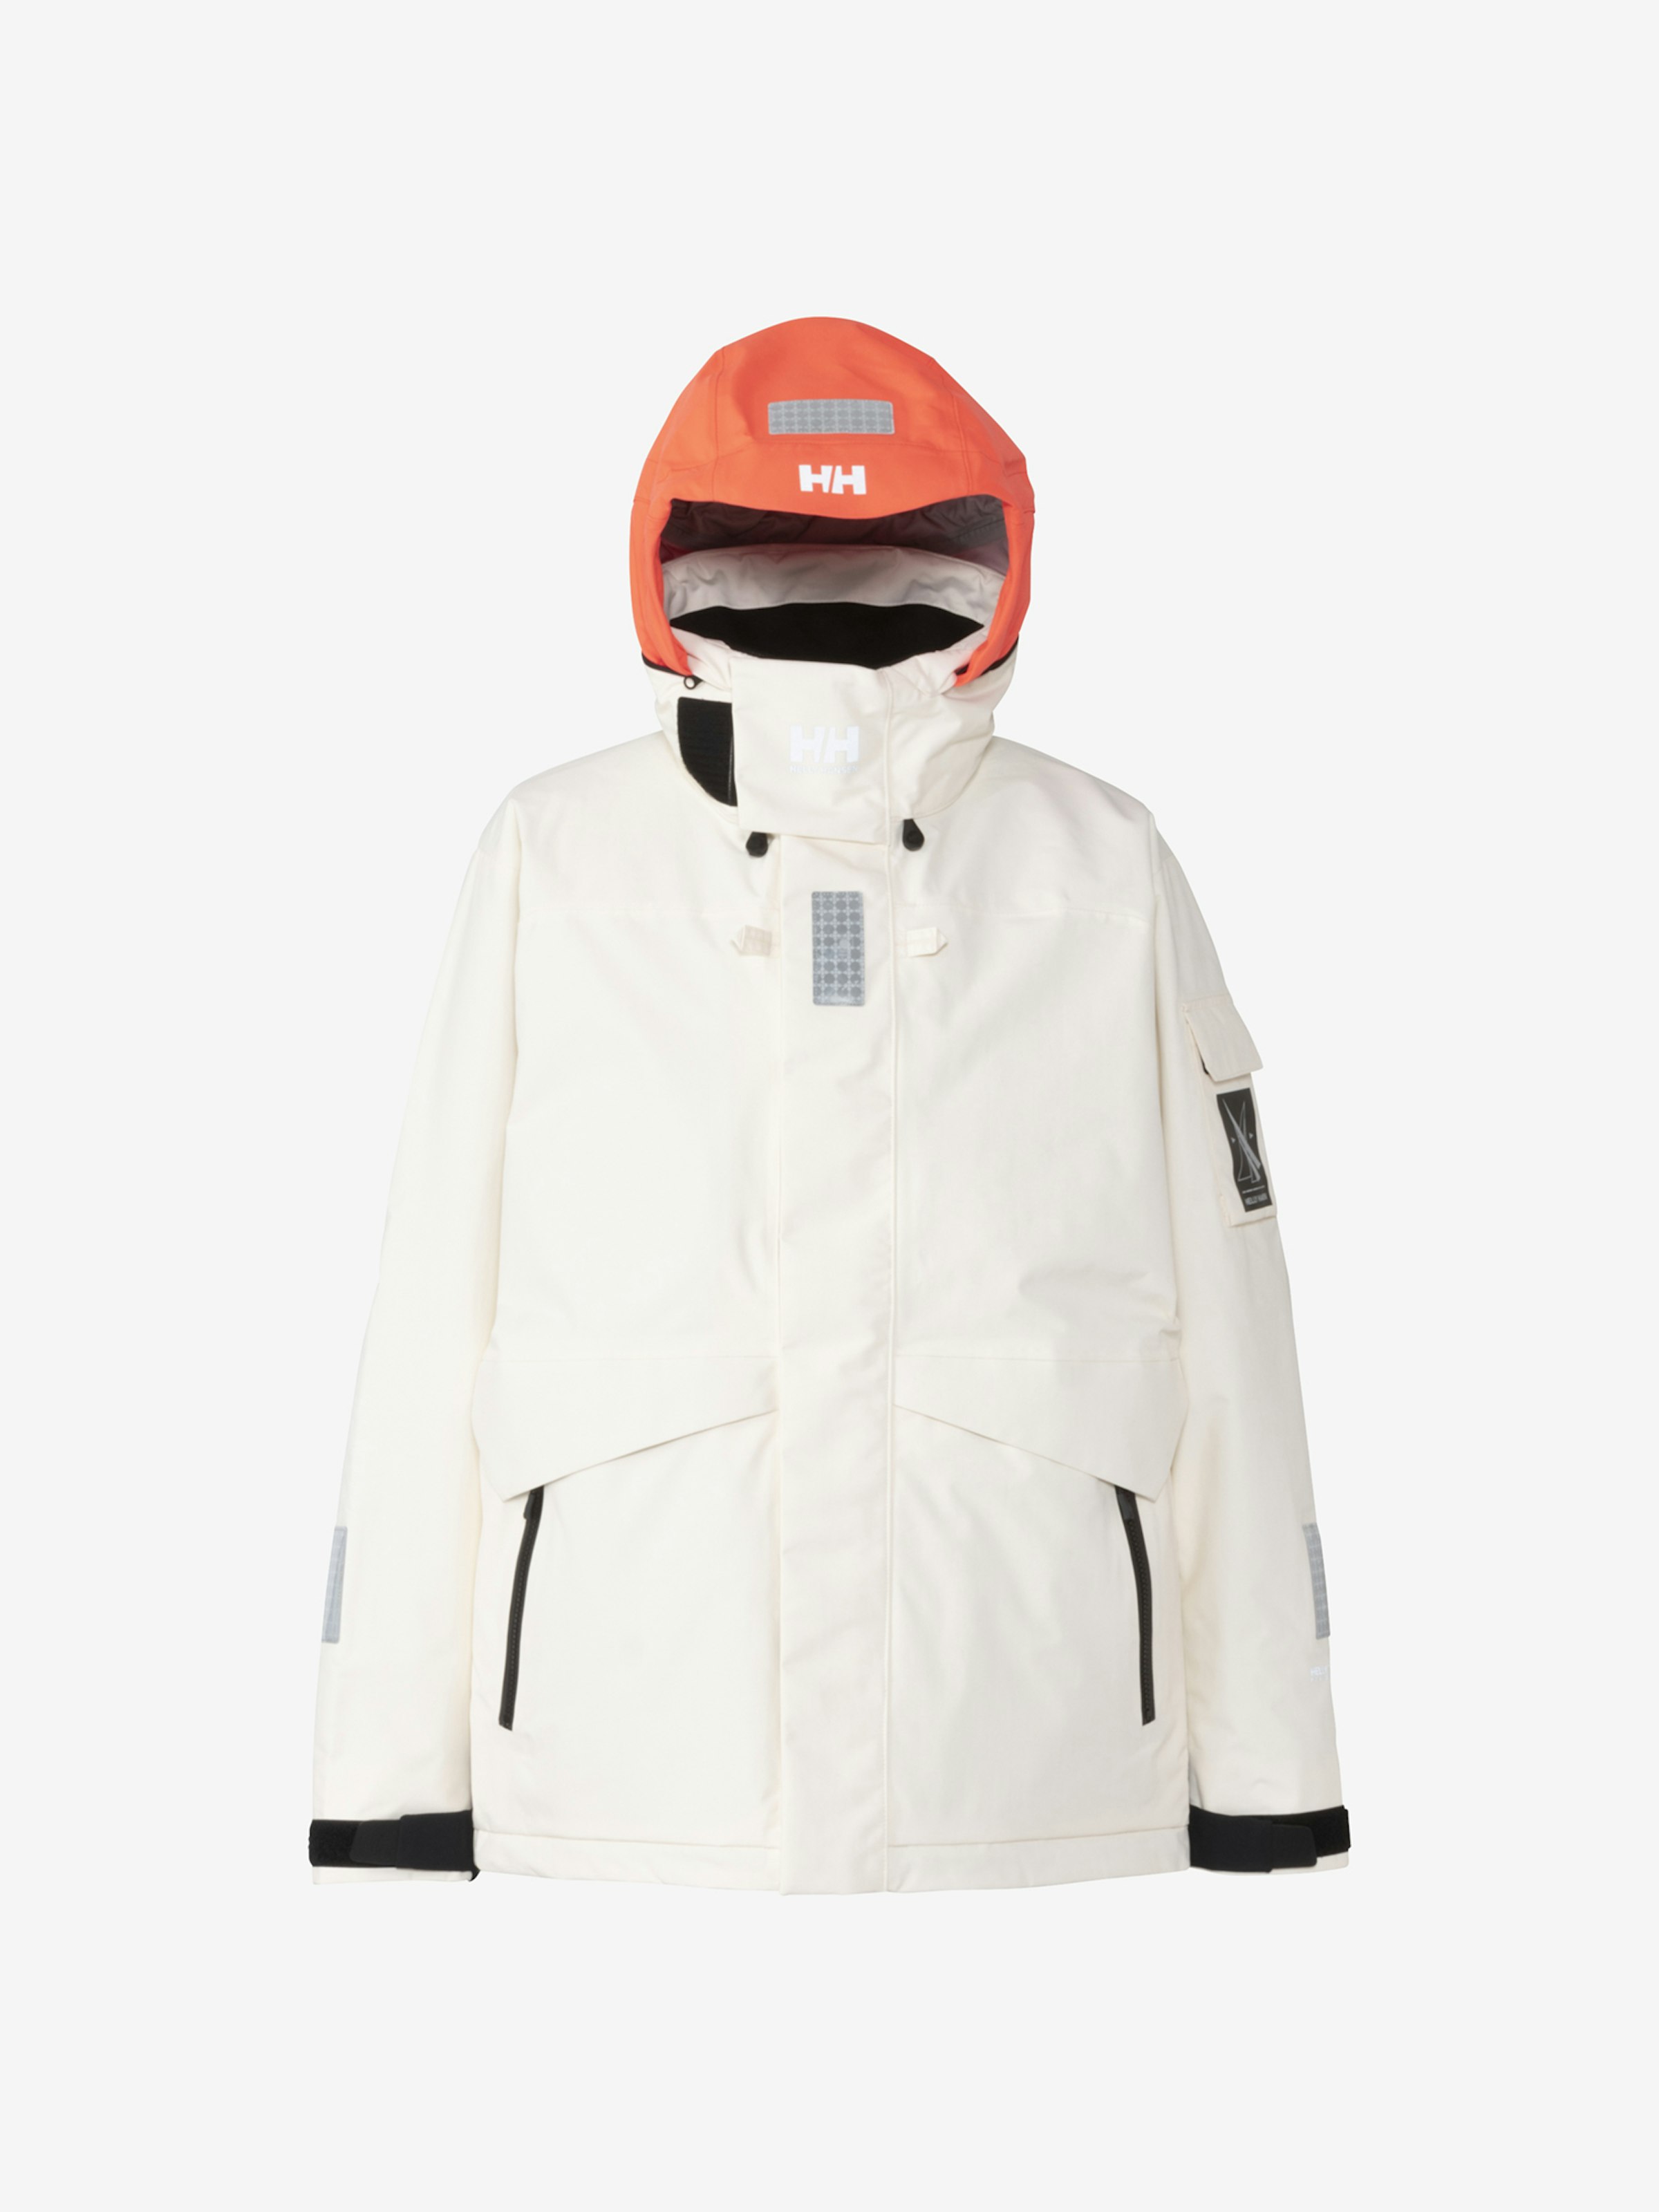 The classic sailing jacket 'Ocean Frey Jacket.' The 2-layer construction of the fabric, with waterproof and breathable properties, has been changed to an environmentally friendly material using recycled nylon (53% recycled material). The waterproof coating has been updated with a hydrophobic polycarbonate blend coating. Each for 37,400 yen (tax included).